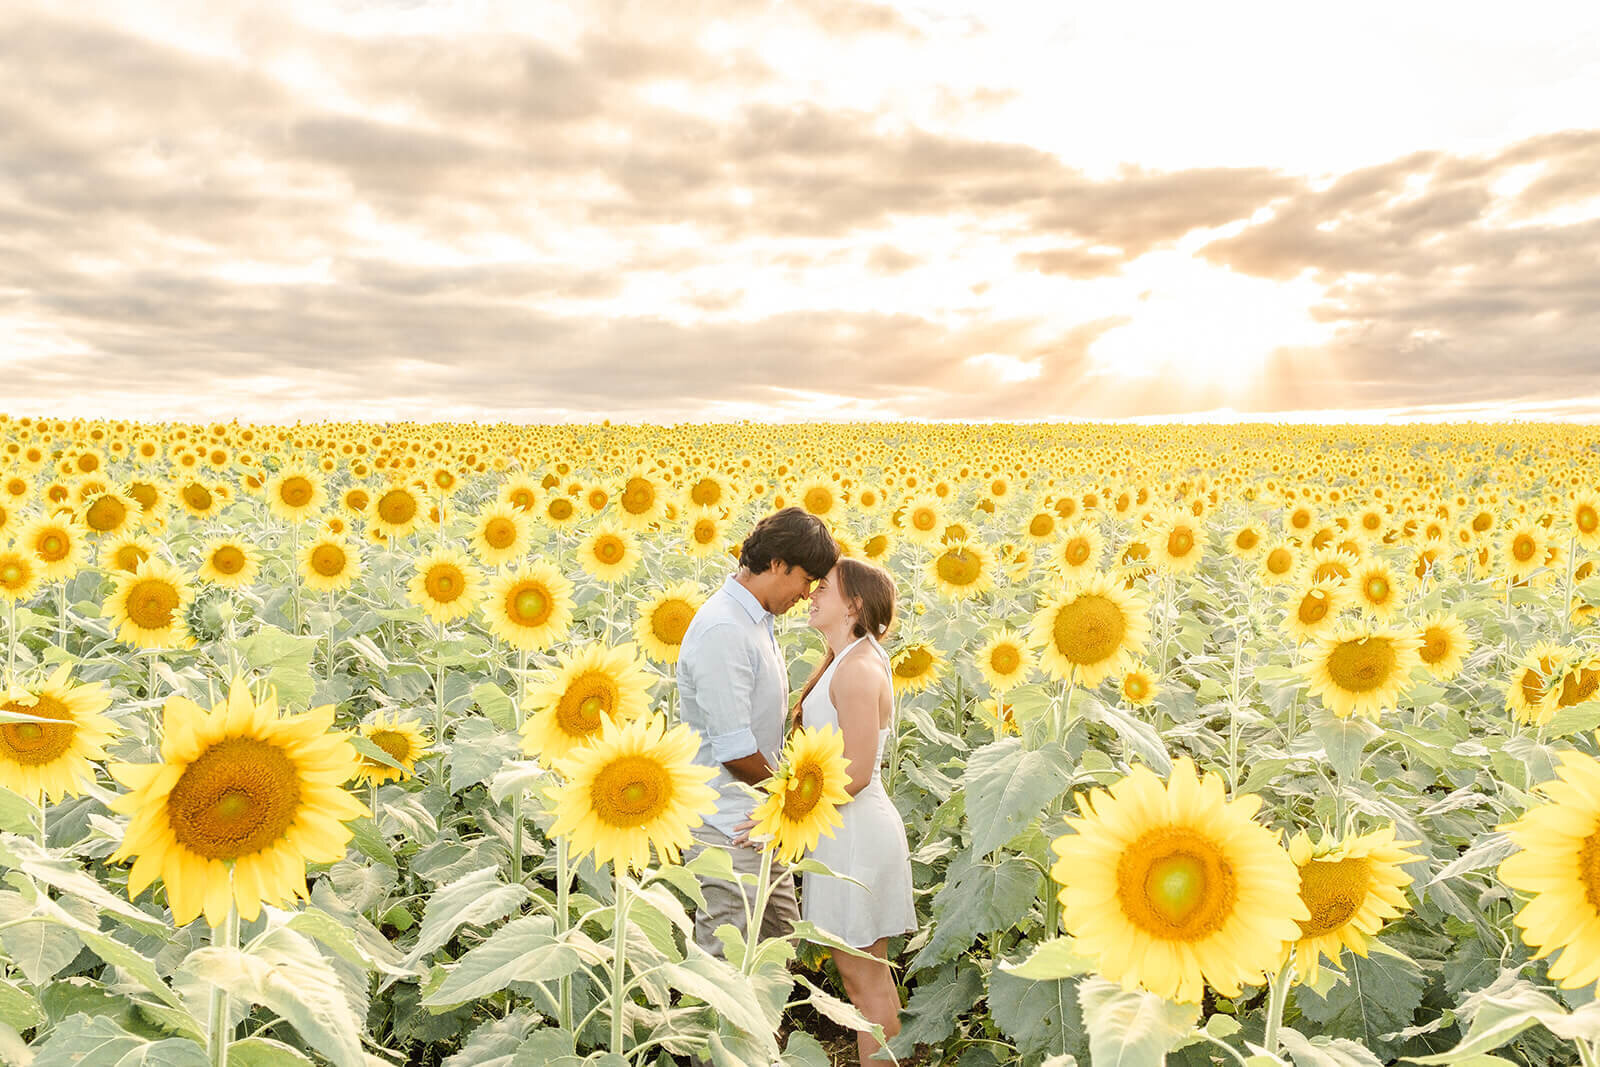 Engaged couple surrounded by vibrant sunflowers in a picturesque Brisbane field